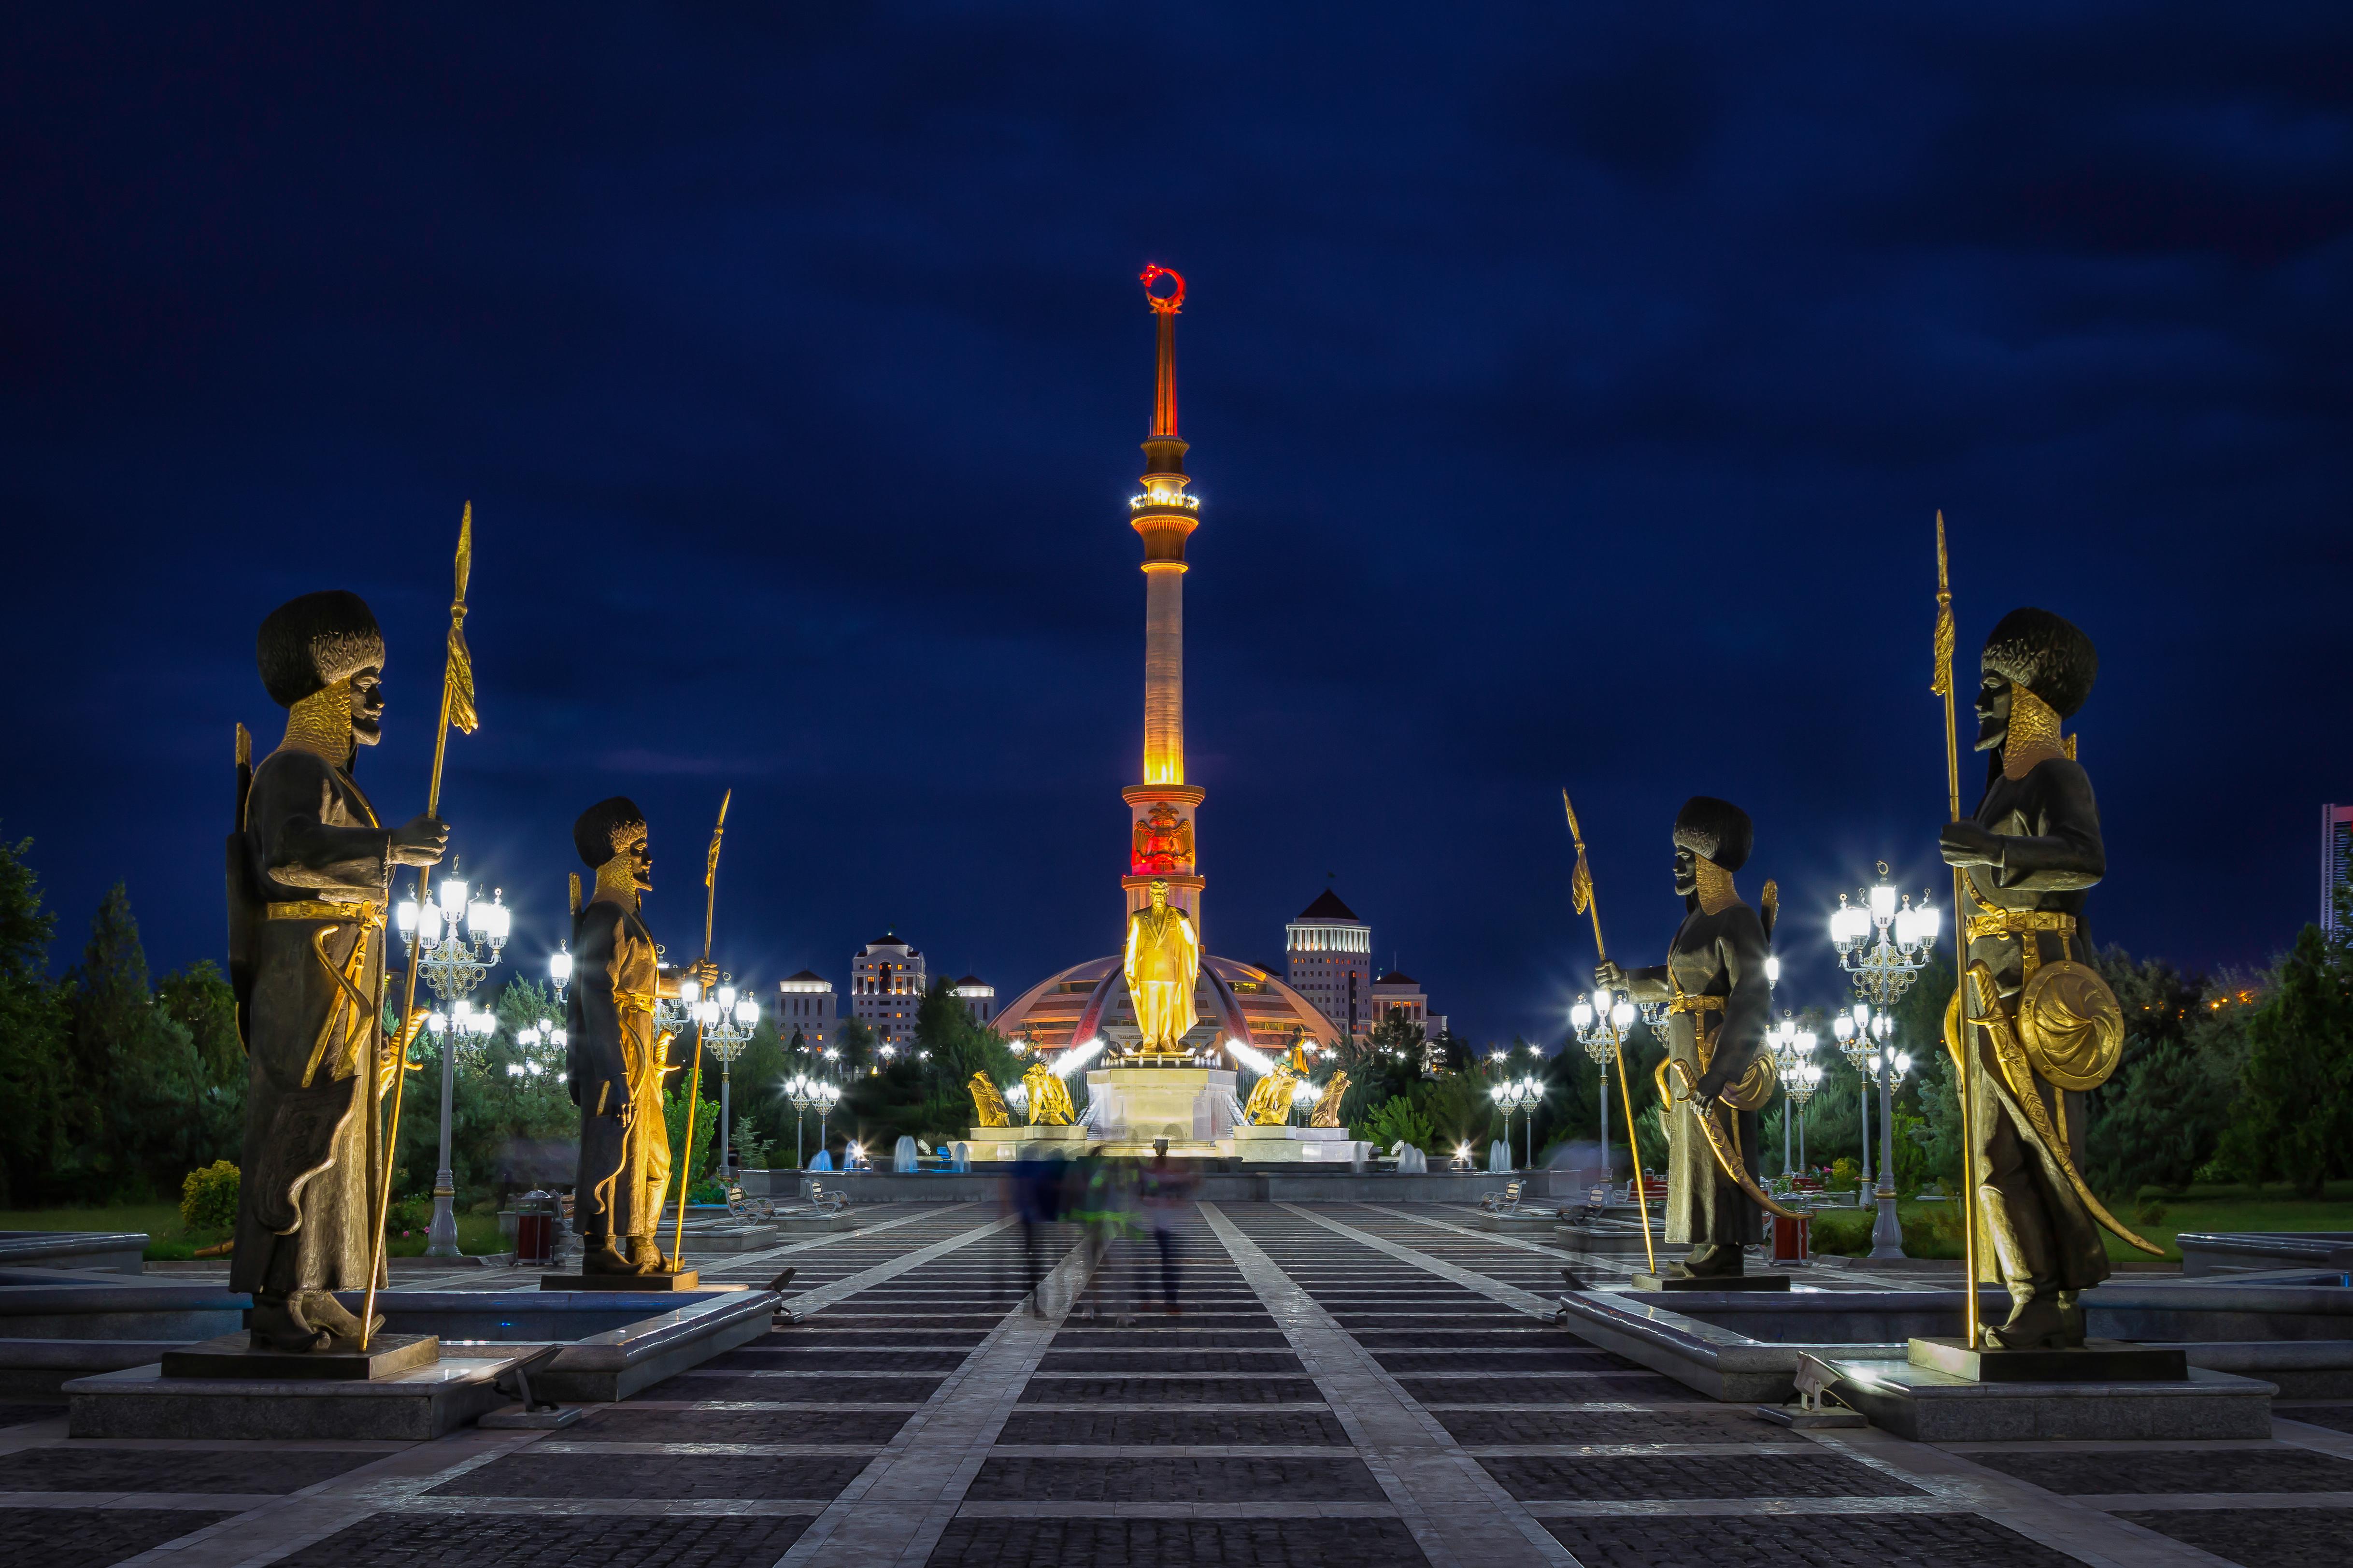 Vistors can enjoy a nighttime stroll through the beautifully lit Independence square. © Jakub Buza / Shutterstock